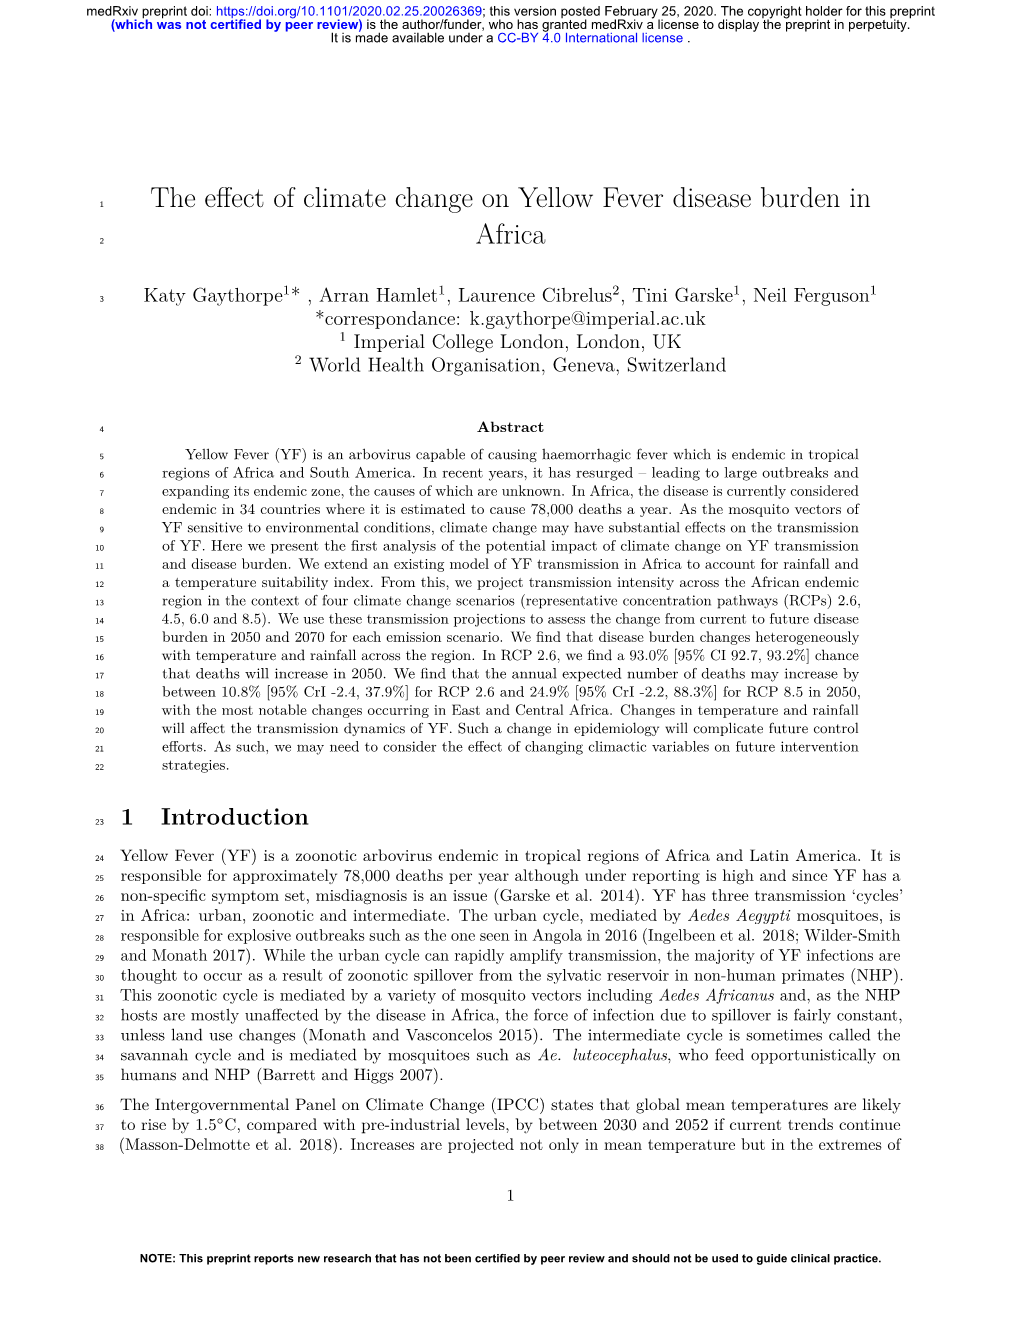 The Effect of Climate Change on Yellow Fever Disease Burden in Africa